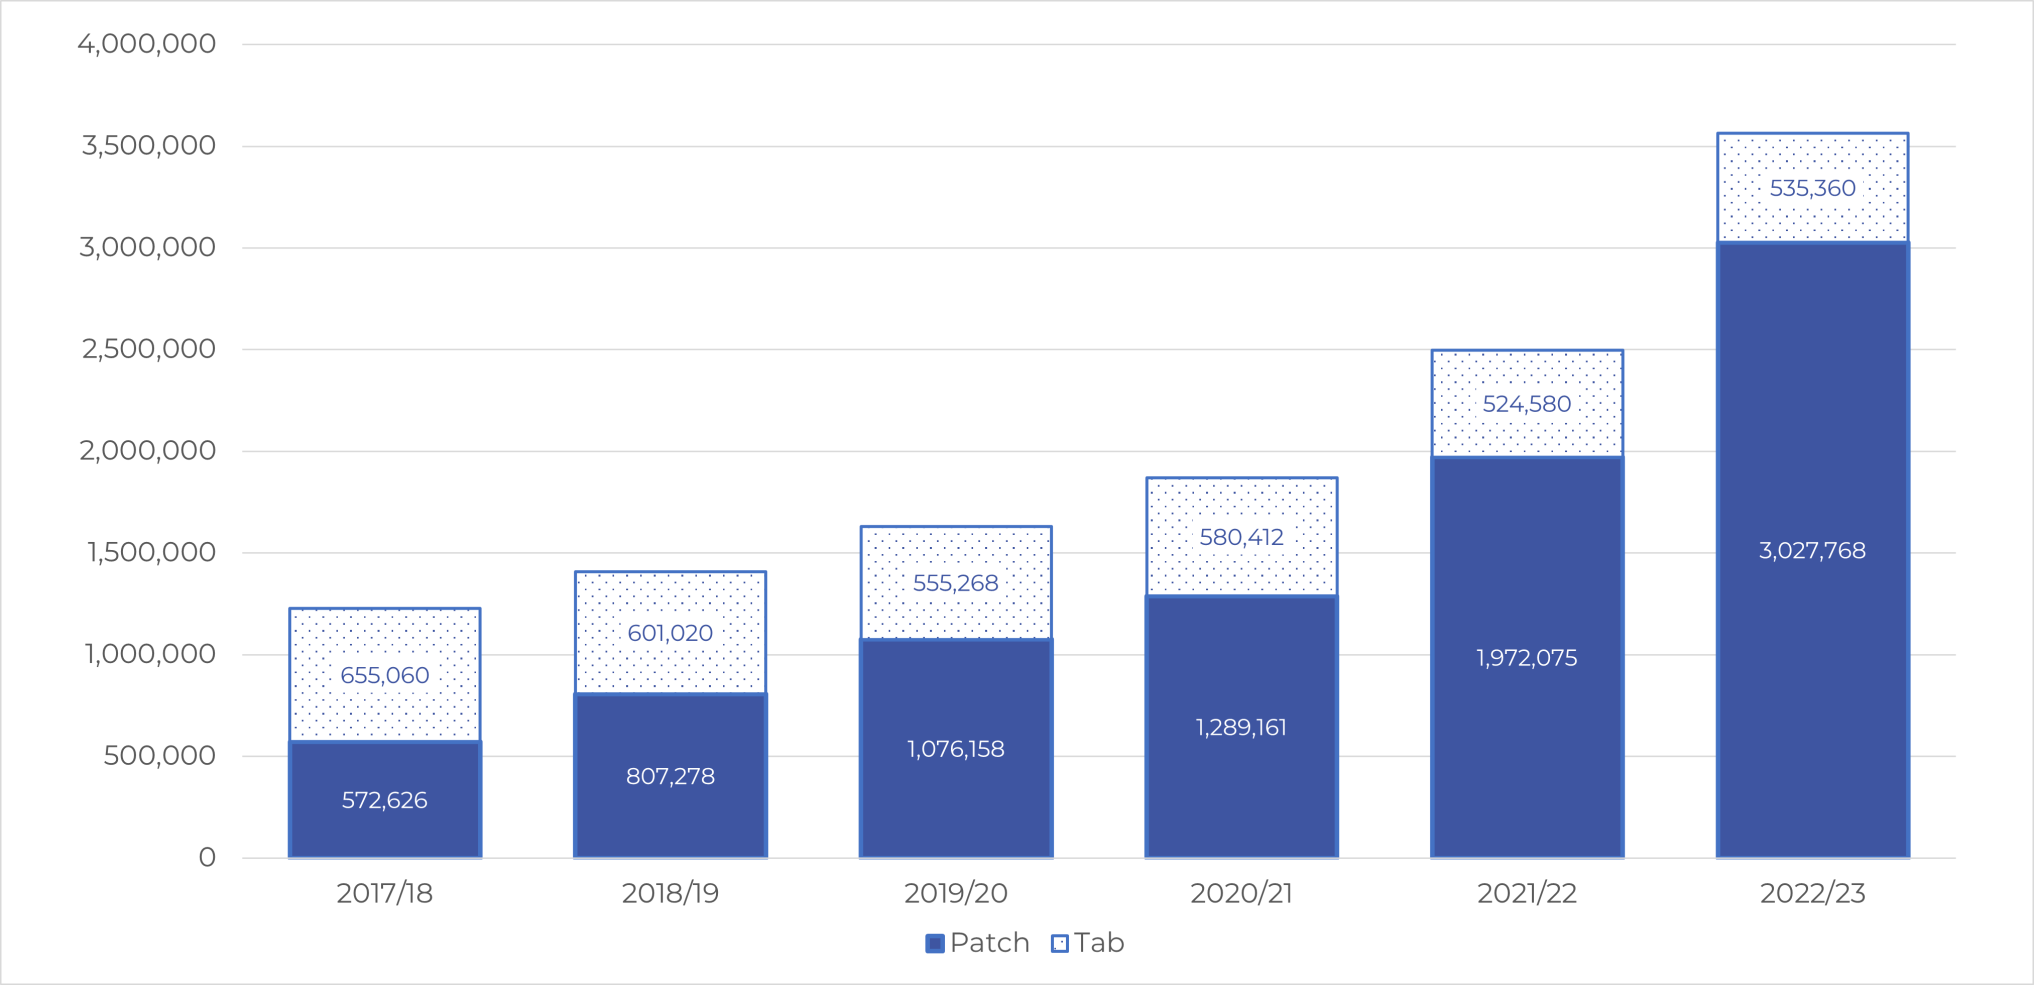 Graph shows that year on year demand for patches has increased significantly. While demand for tablets has dropped slightly. In 2017/18 a little under 600.000 patches were dispensed. Last financial year it was over 3 million!. 